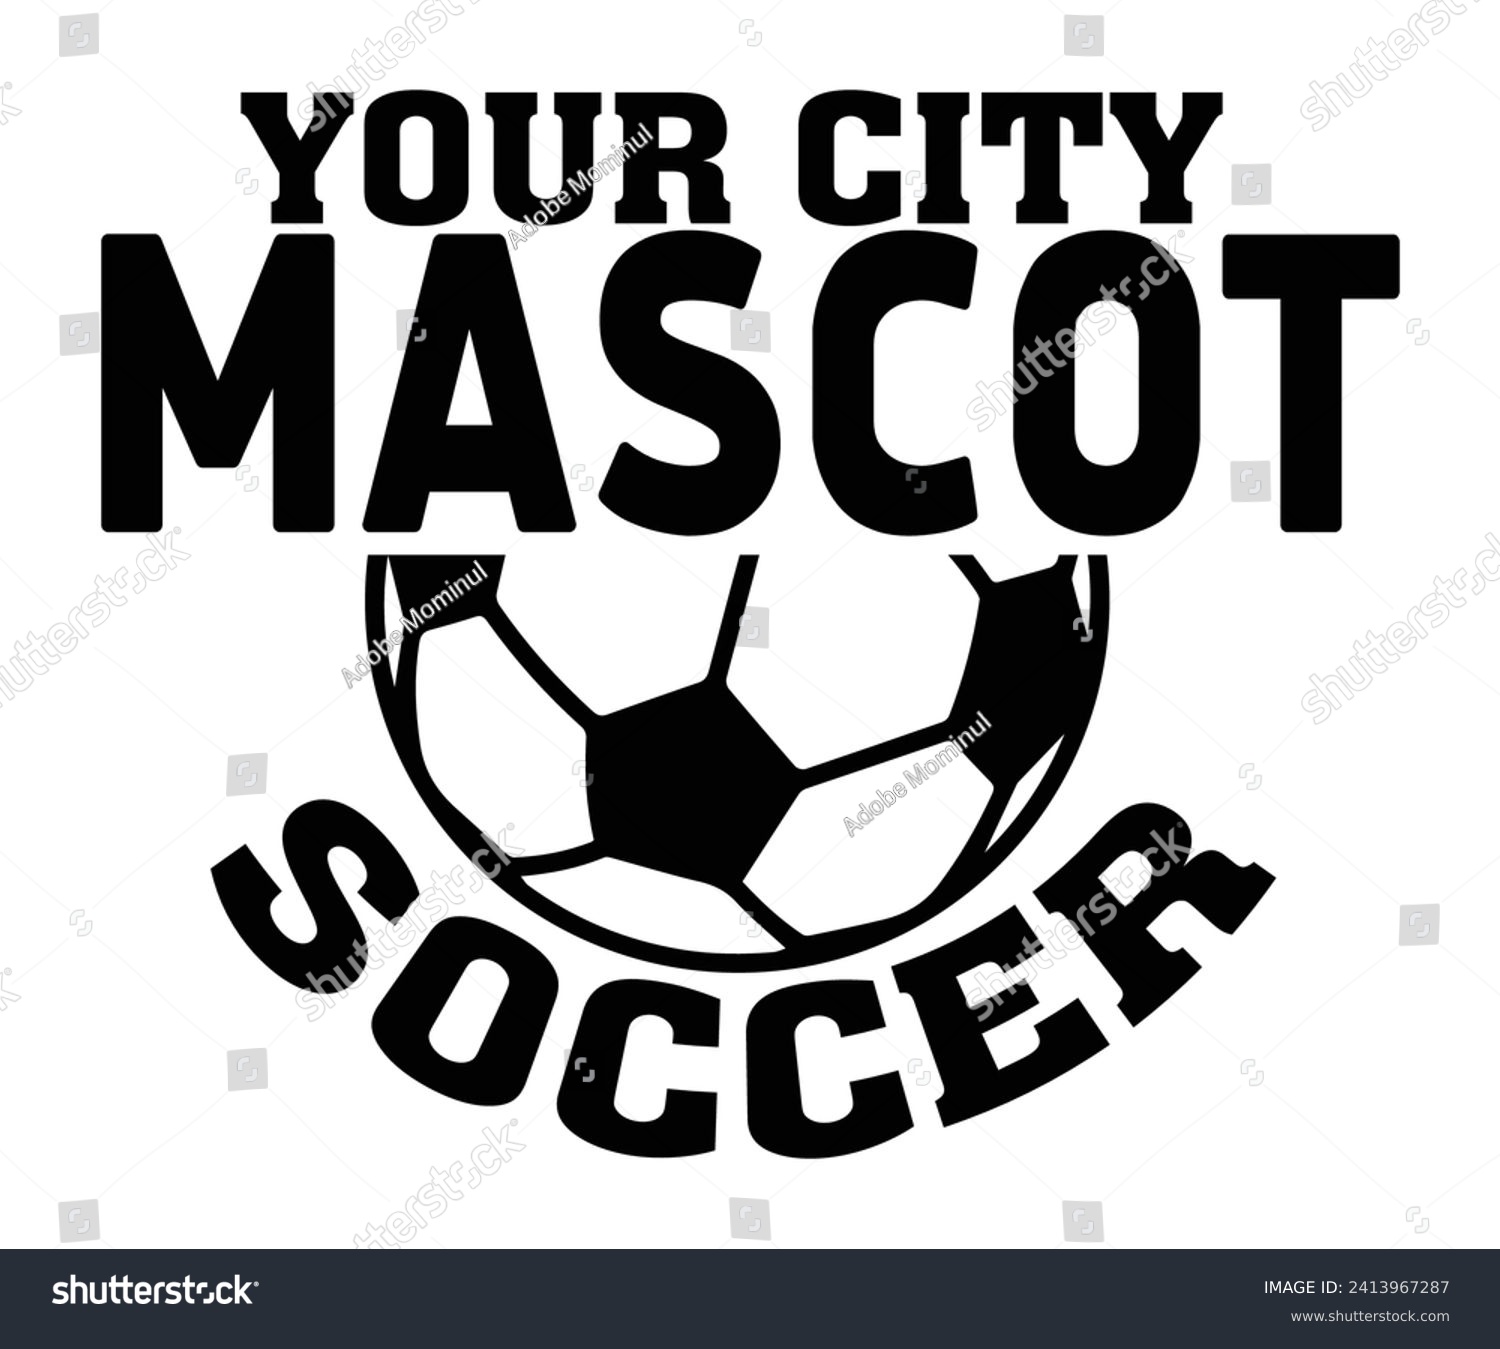 SVG of Your City Mascot Soccer Svg,Soccer Quote Svg,Retro,Soccer Mom Shirt,Funny Shirt,Soccar Player Shirt,Game Day Shirt,Gift For Soccer,Dad of Soccer,Soccer Mascot,Soccer Football,Sport Design  svg